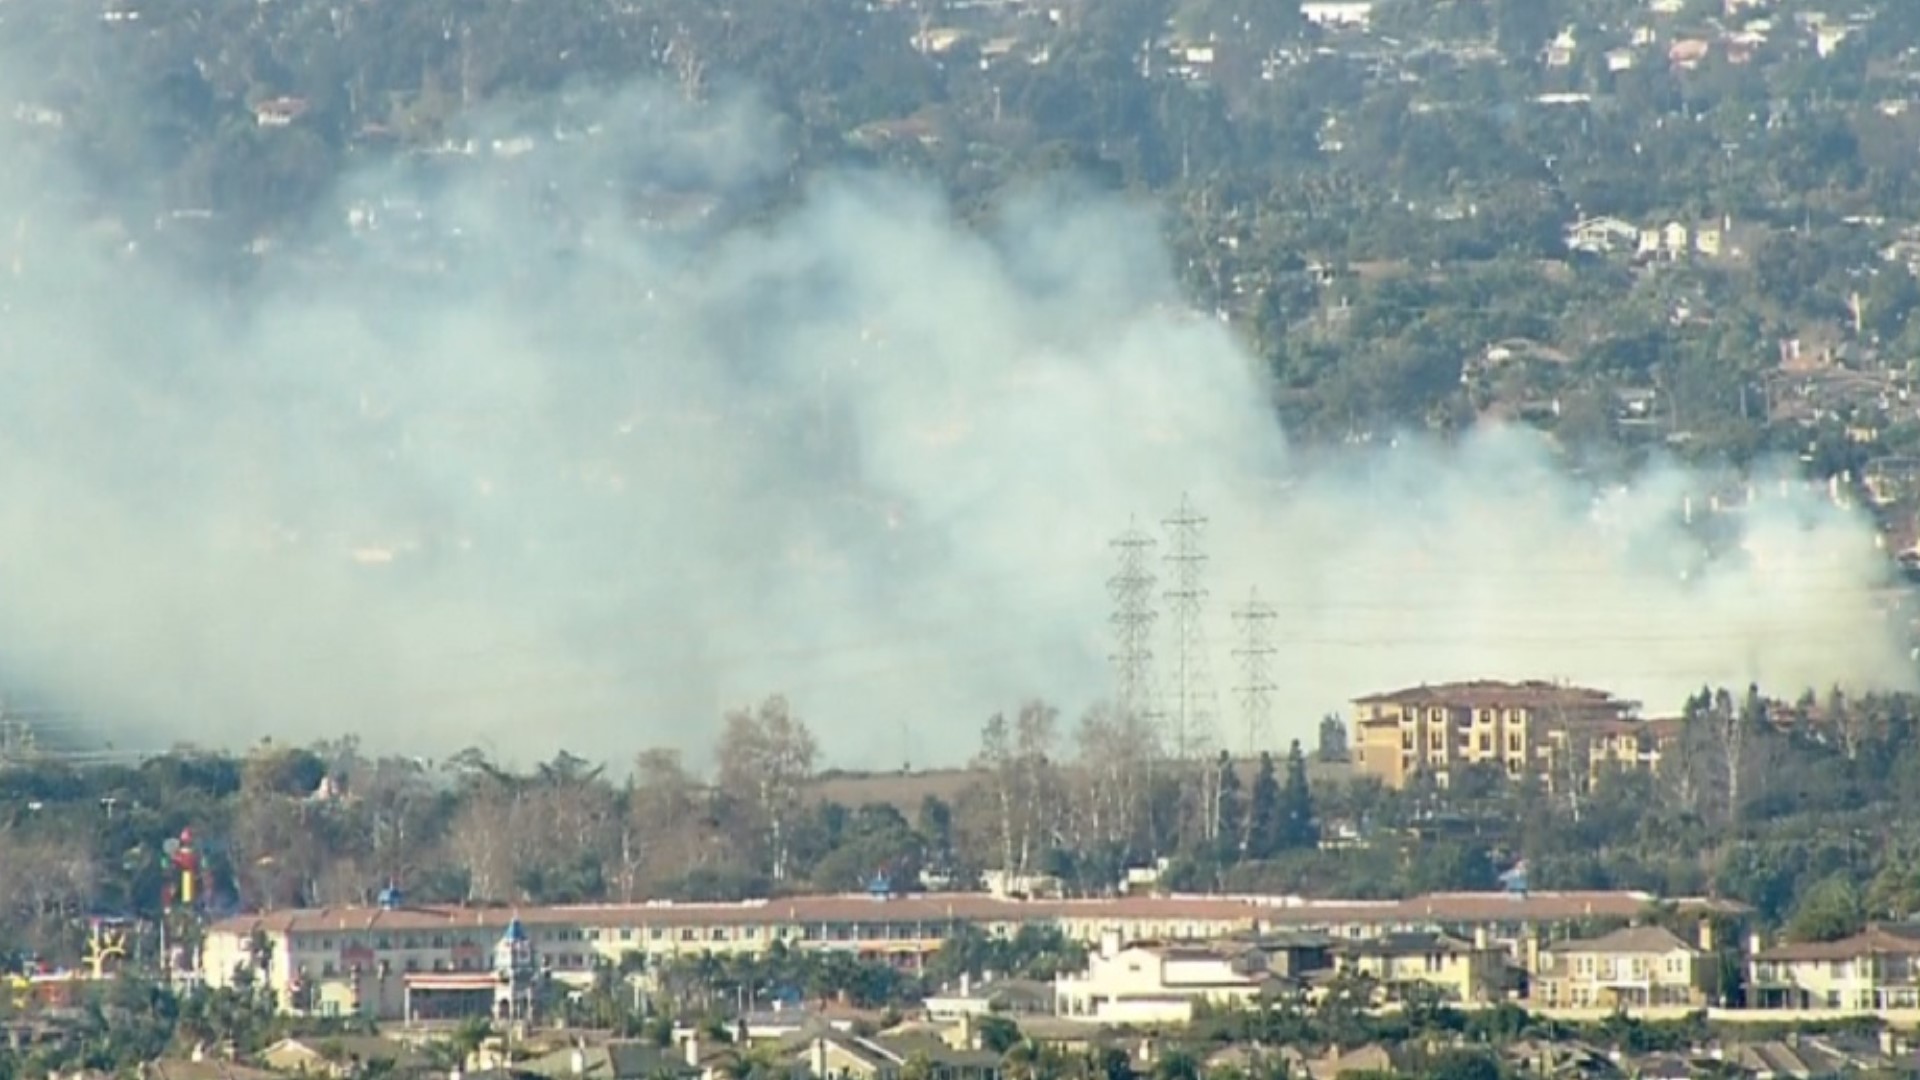 The blaze erupted for unknown reasons off Park Drive and Marina Drive about 2:00 p.m. on Wednesday, according to Cal Fire.